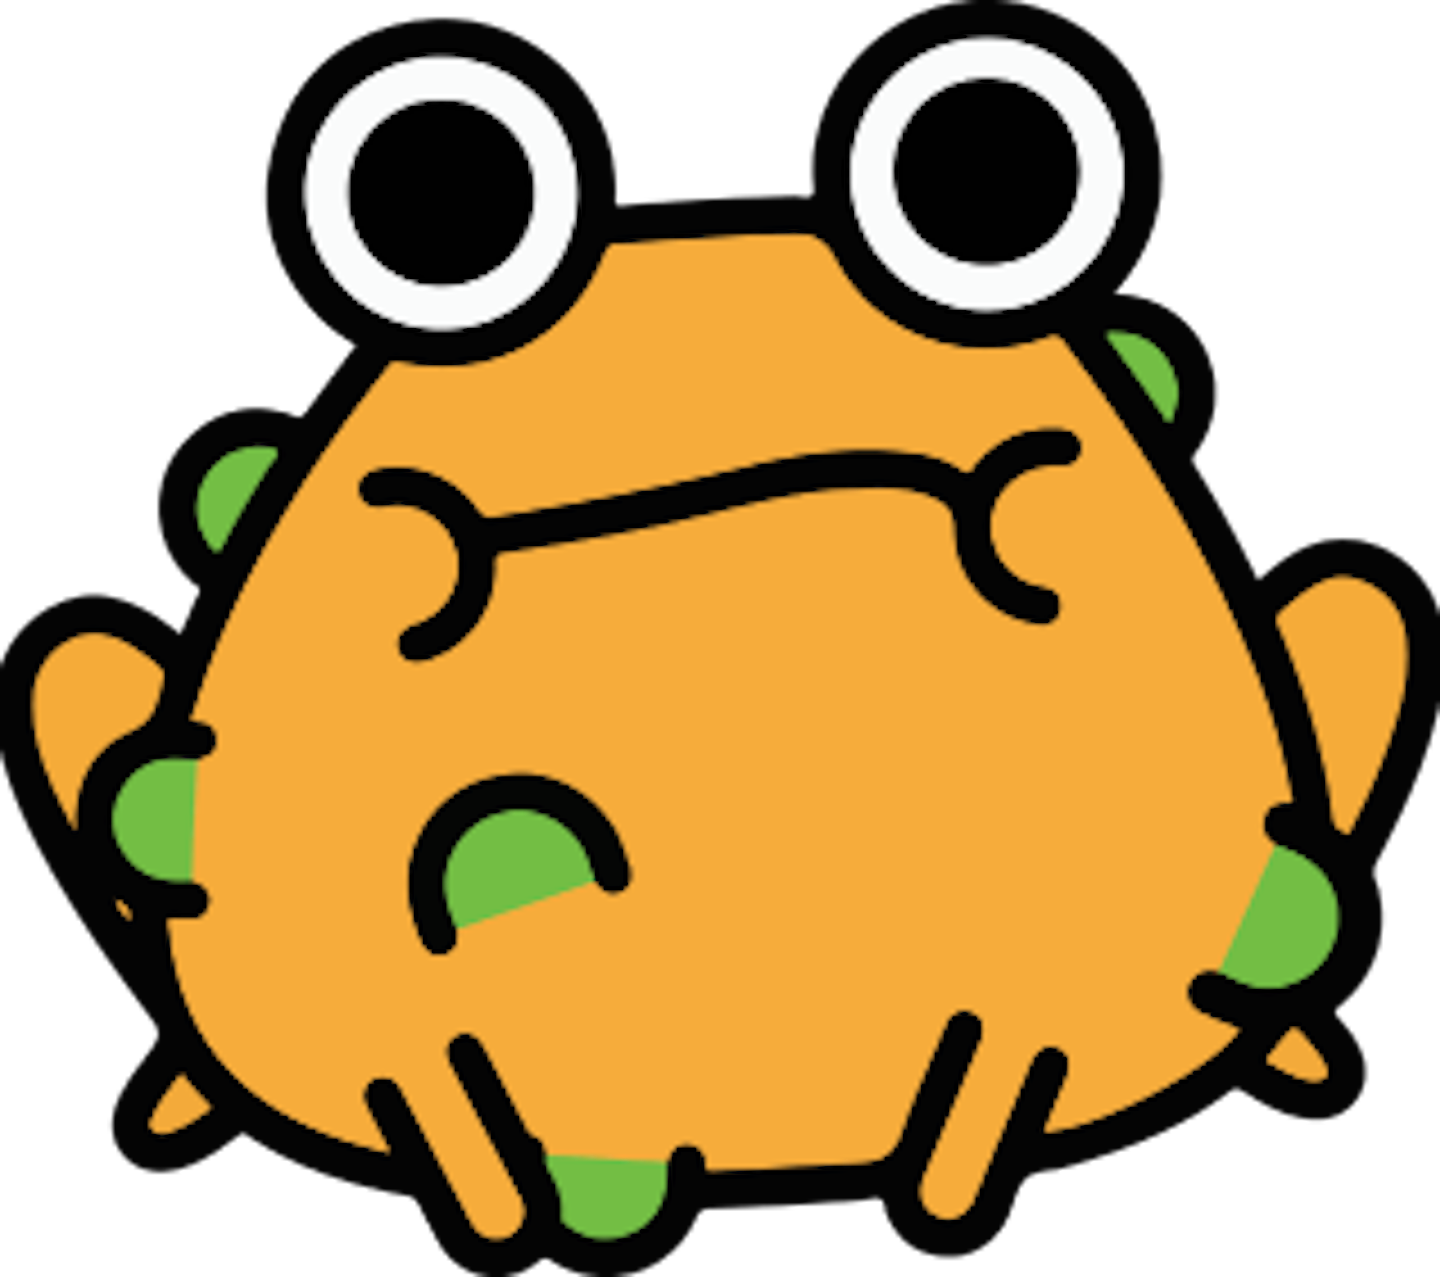 This is an image of a frog from Toca Pet Doctor